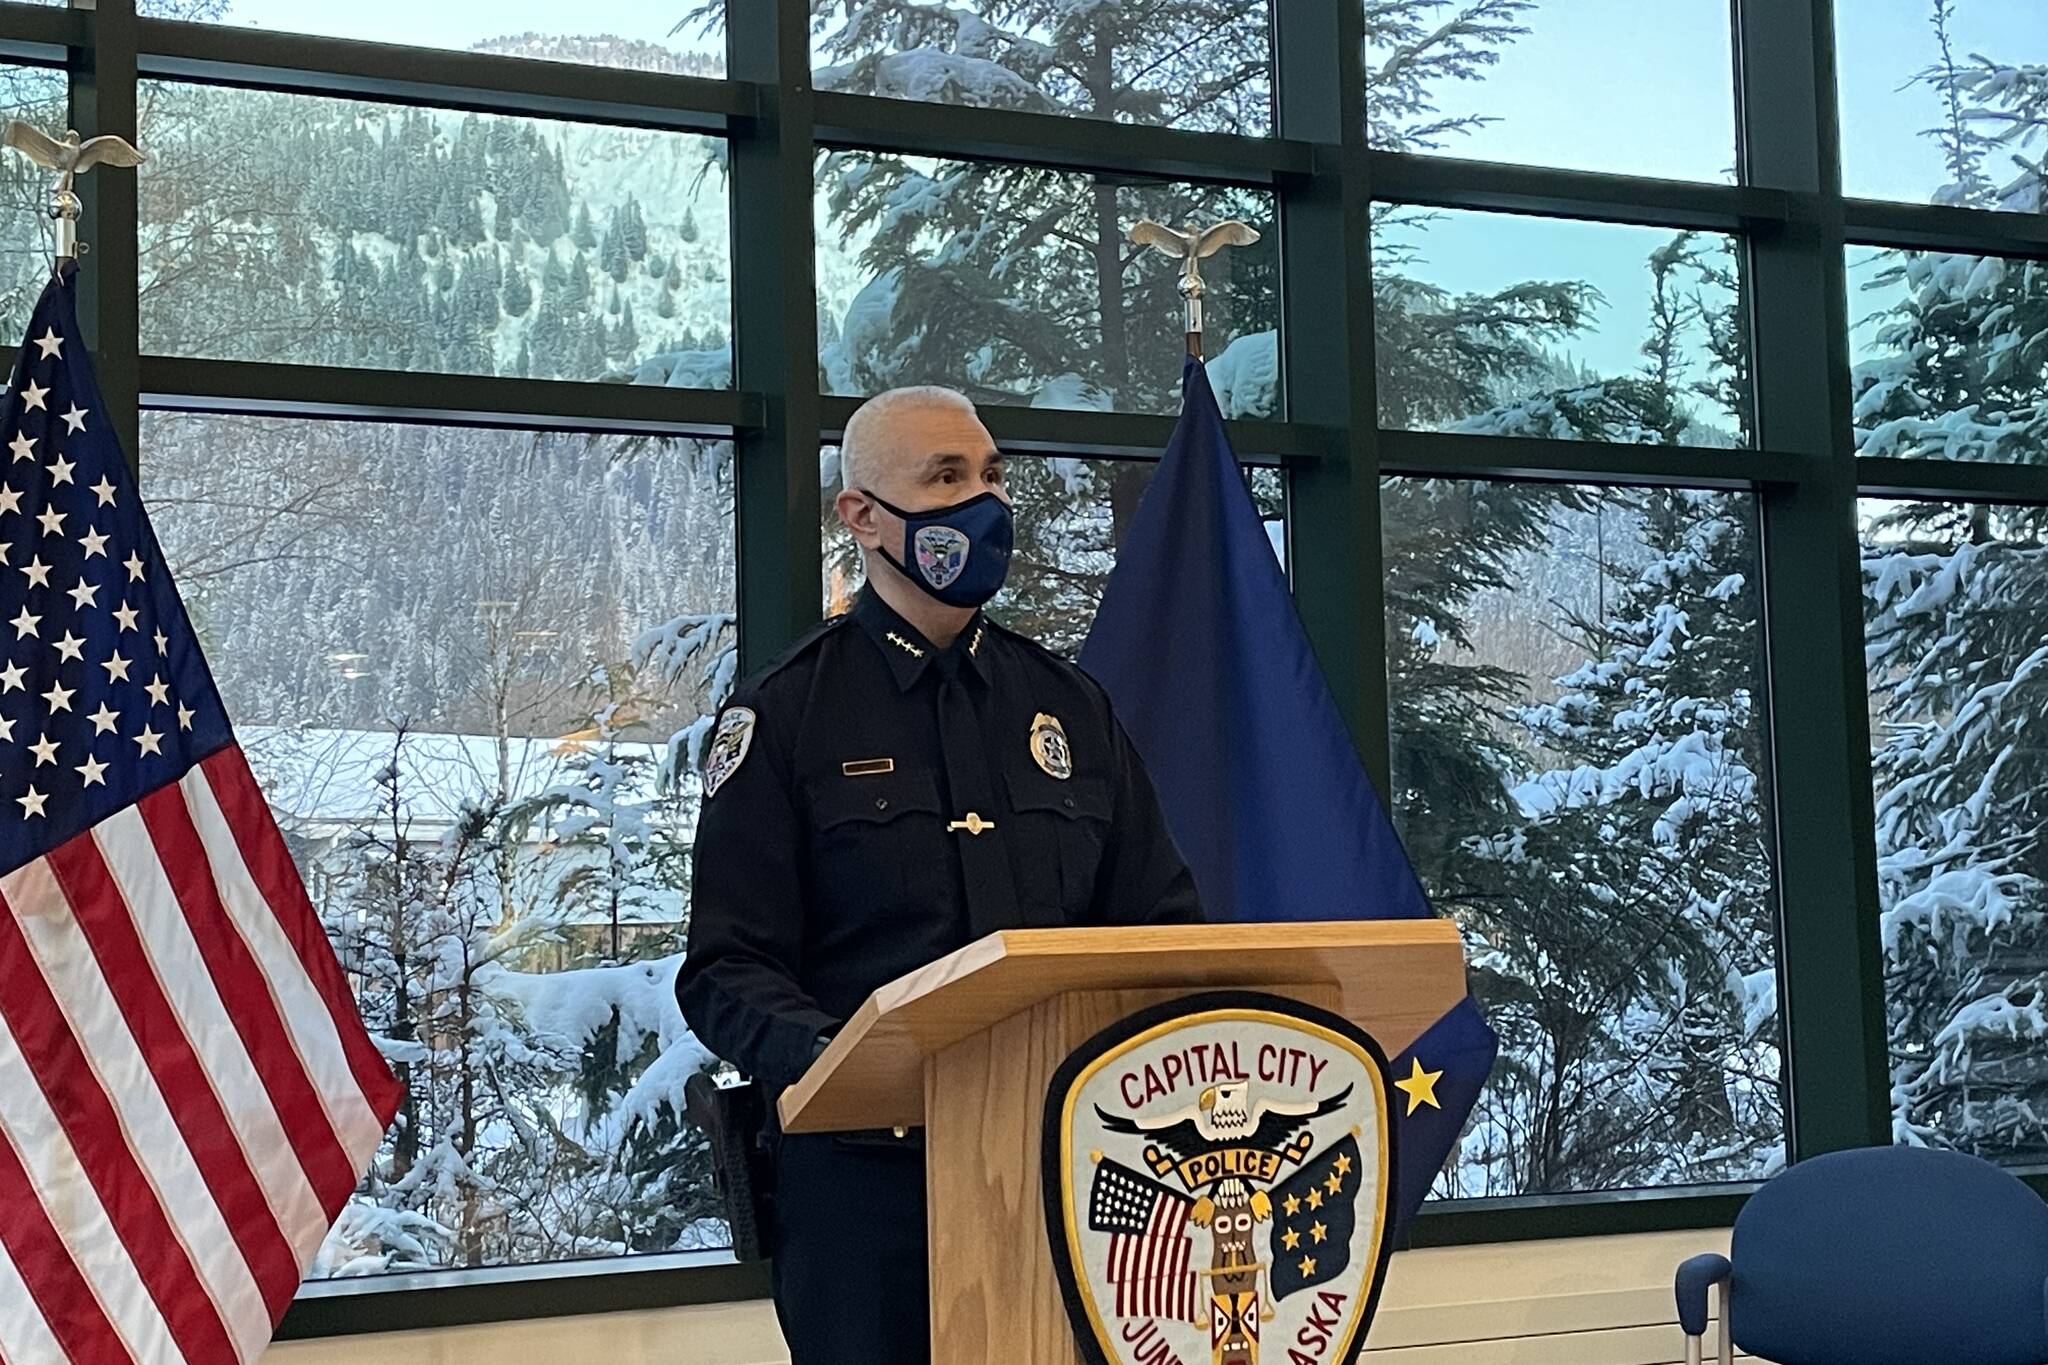 Juneau Police Chief Ed Mercer speaks during a news conference on Feb. 23, 2022 about an officer-involved shooting the previous day. (Michael S. Lockett / Juneau Empire)